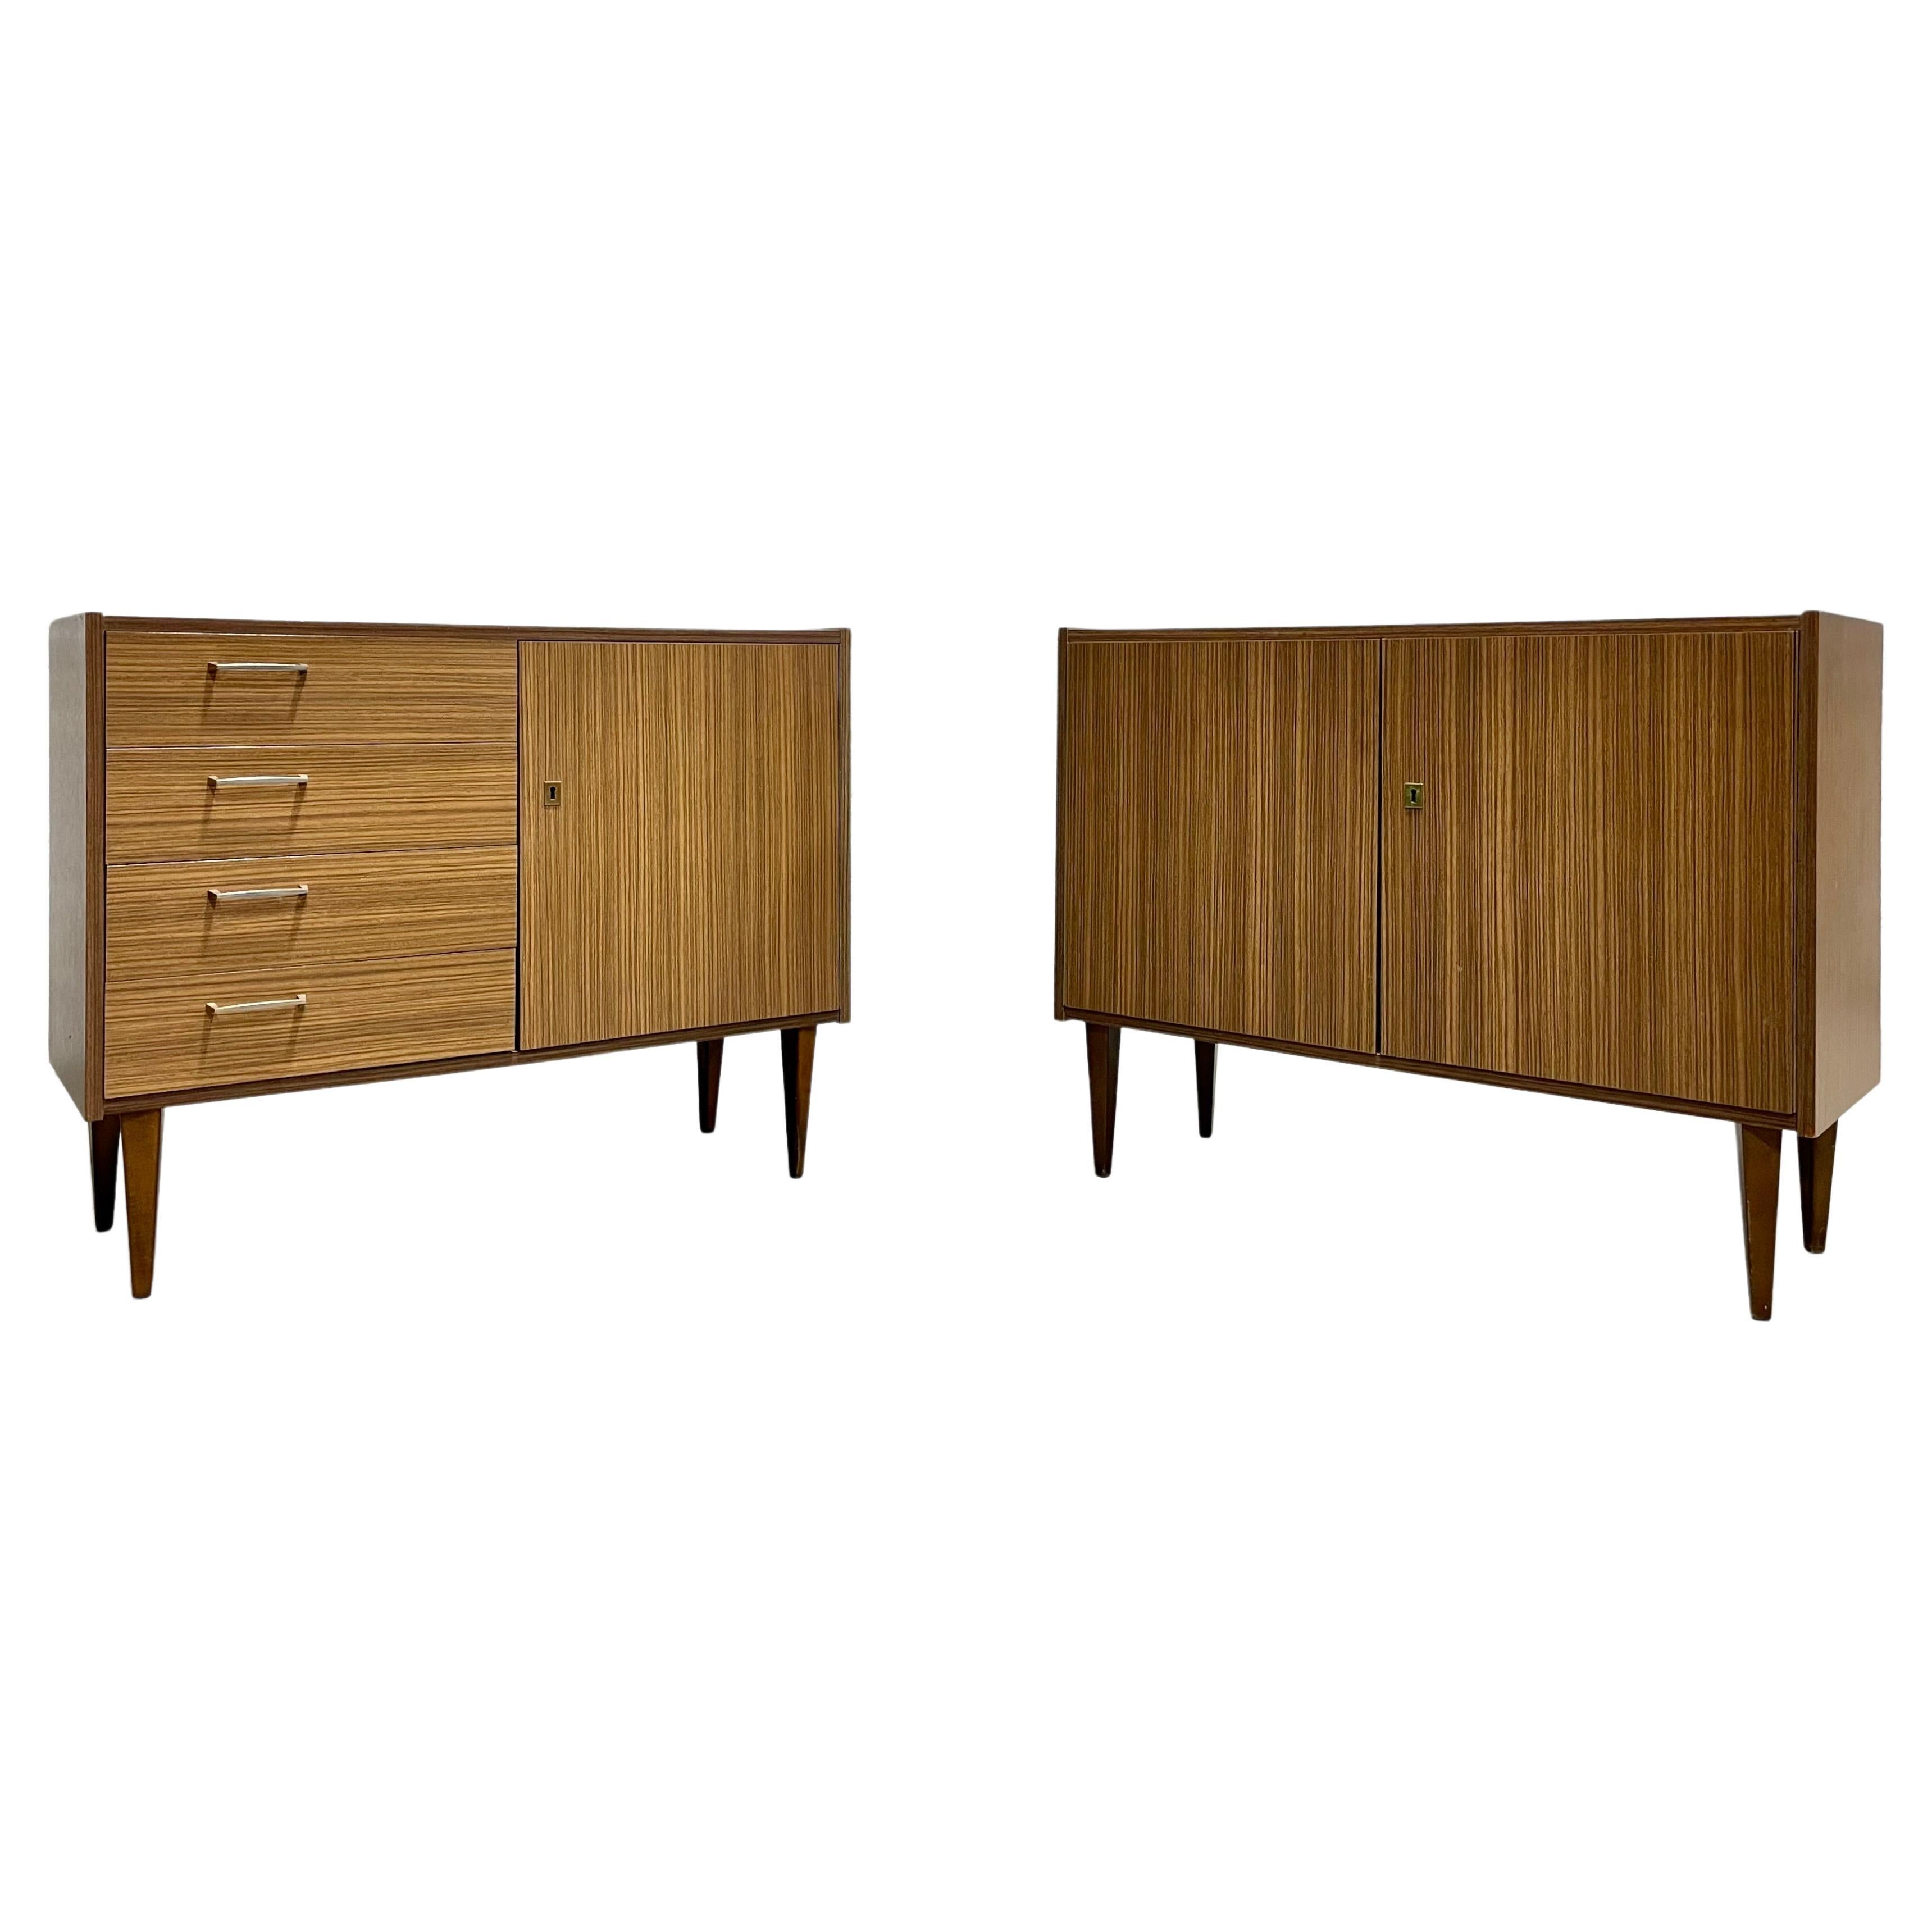 Pair of Mid-Century Modern Laminate Credenzas/ Cabinets, Made in Germany